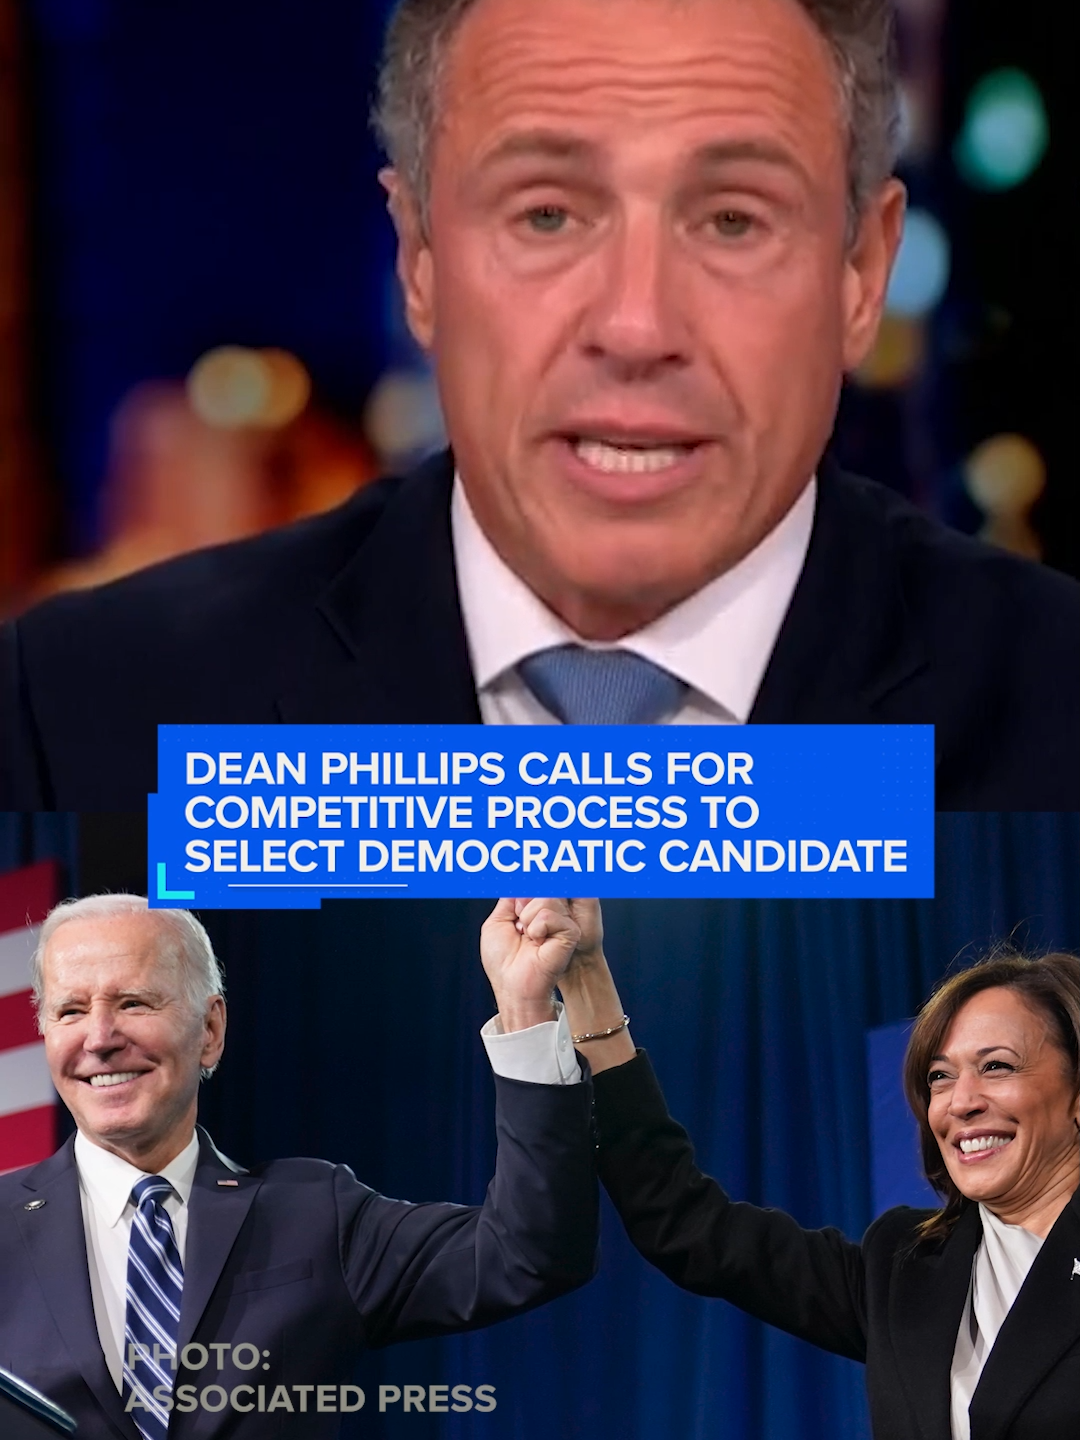 Rep. Dean Phillips, who won 5 delegates in the democratic primaries, is calling for a competitive process after Biden dropped out: 